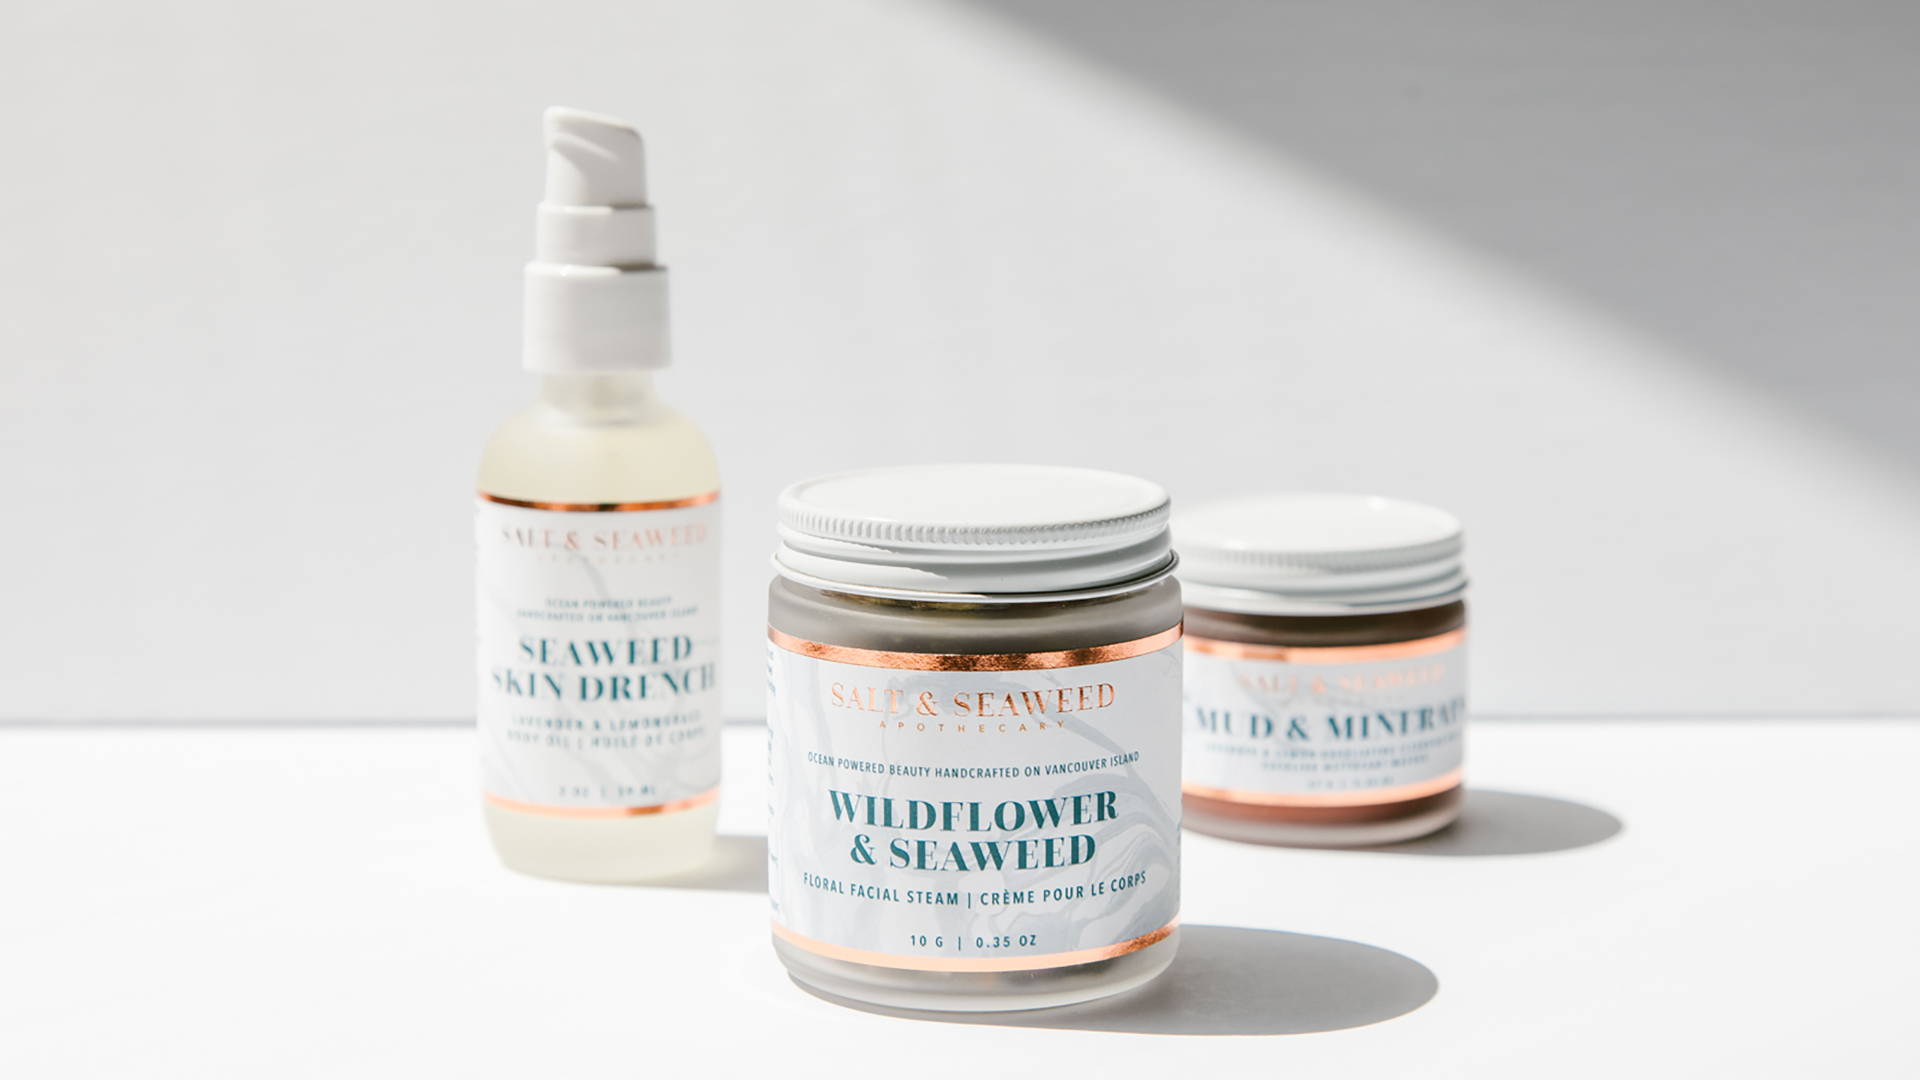 Featured image for Salt & Seaweed is An Elegant Skincare Line With Sustainable Ingredients